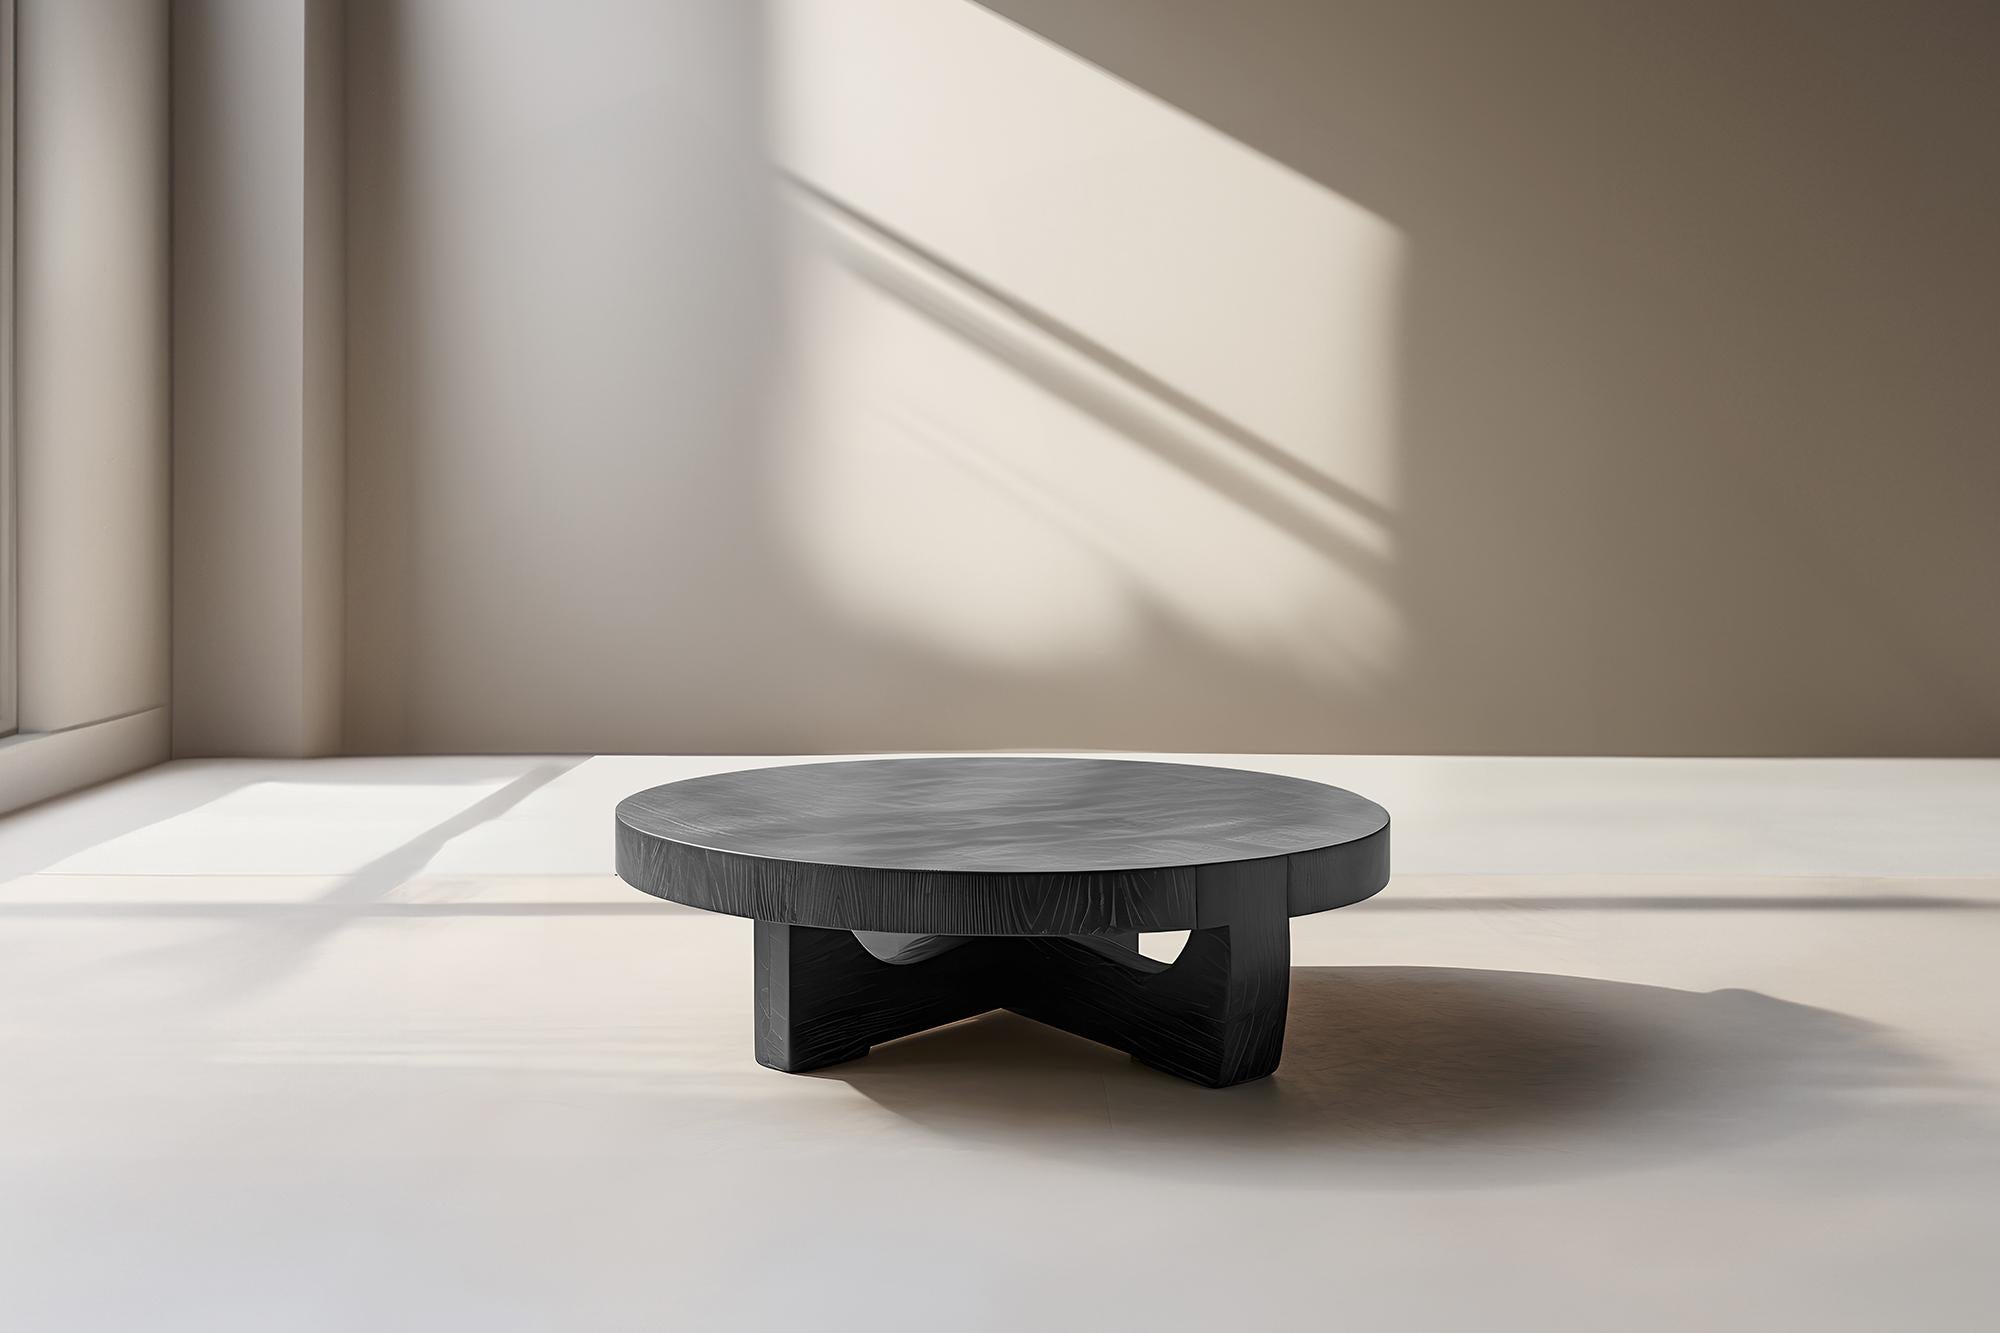 Two-Level Round Coffee Table - Layered Fundamenta 40 by NONO

Sculptural coffee table made of solid wood with a natural water-based or black tinted finish. Due to the nature of the production process, each piece may vary in grain, texture, shape or